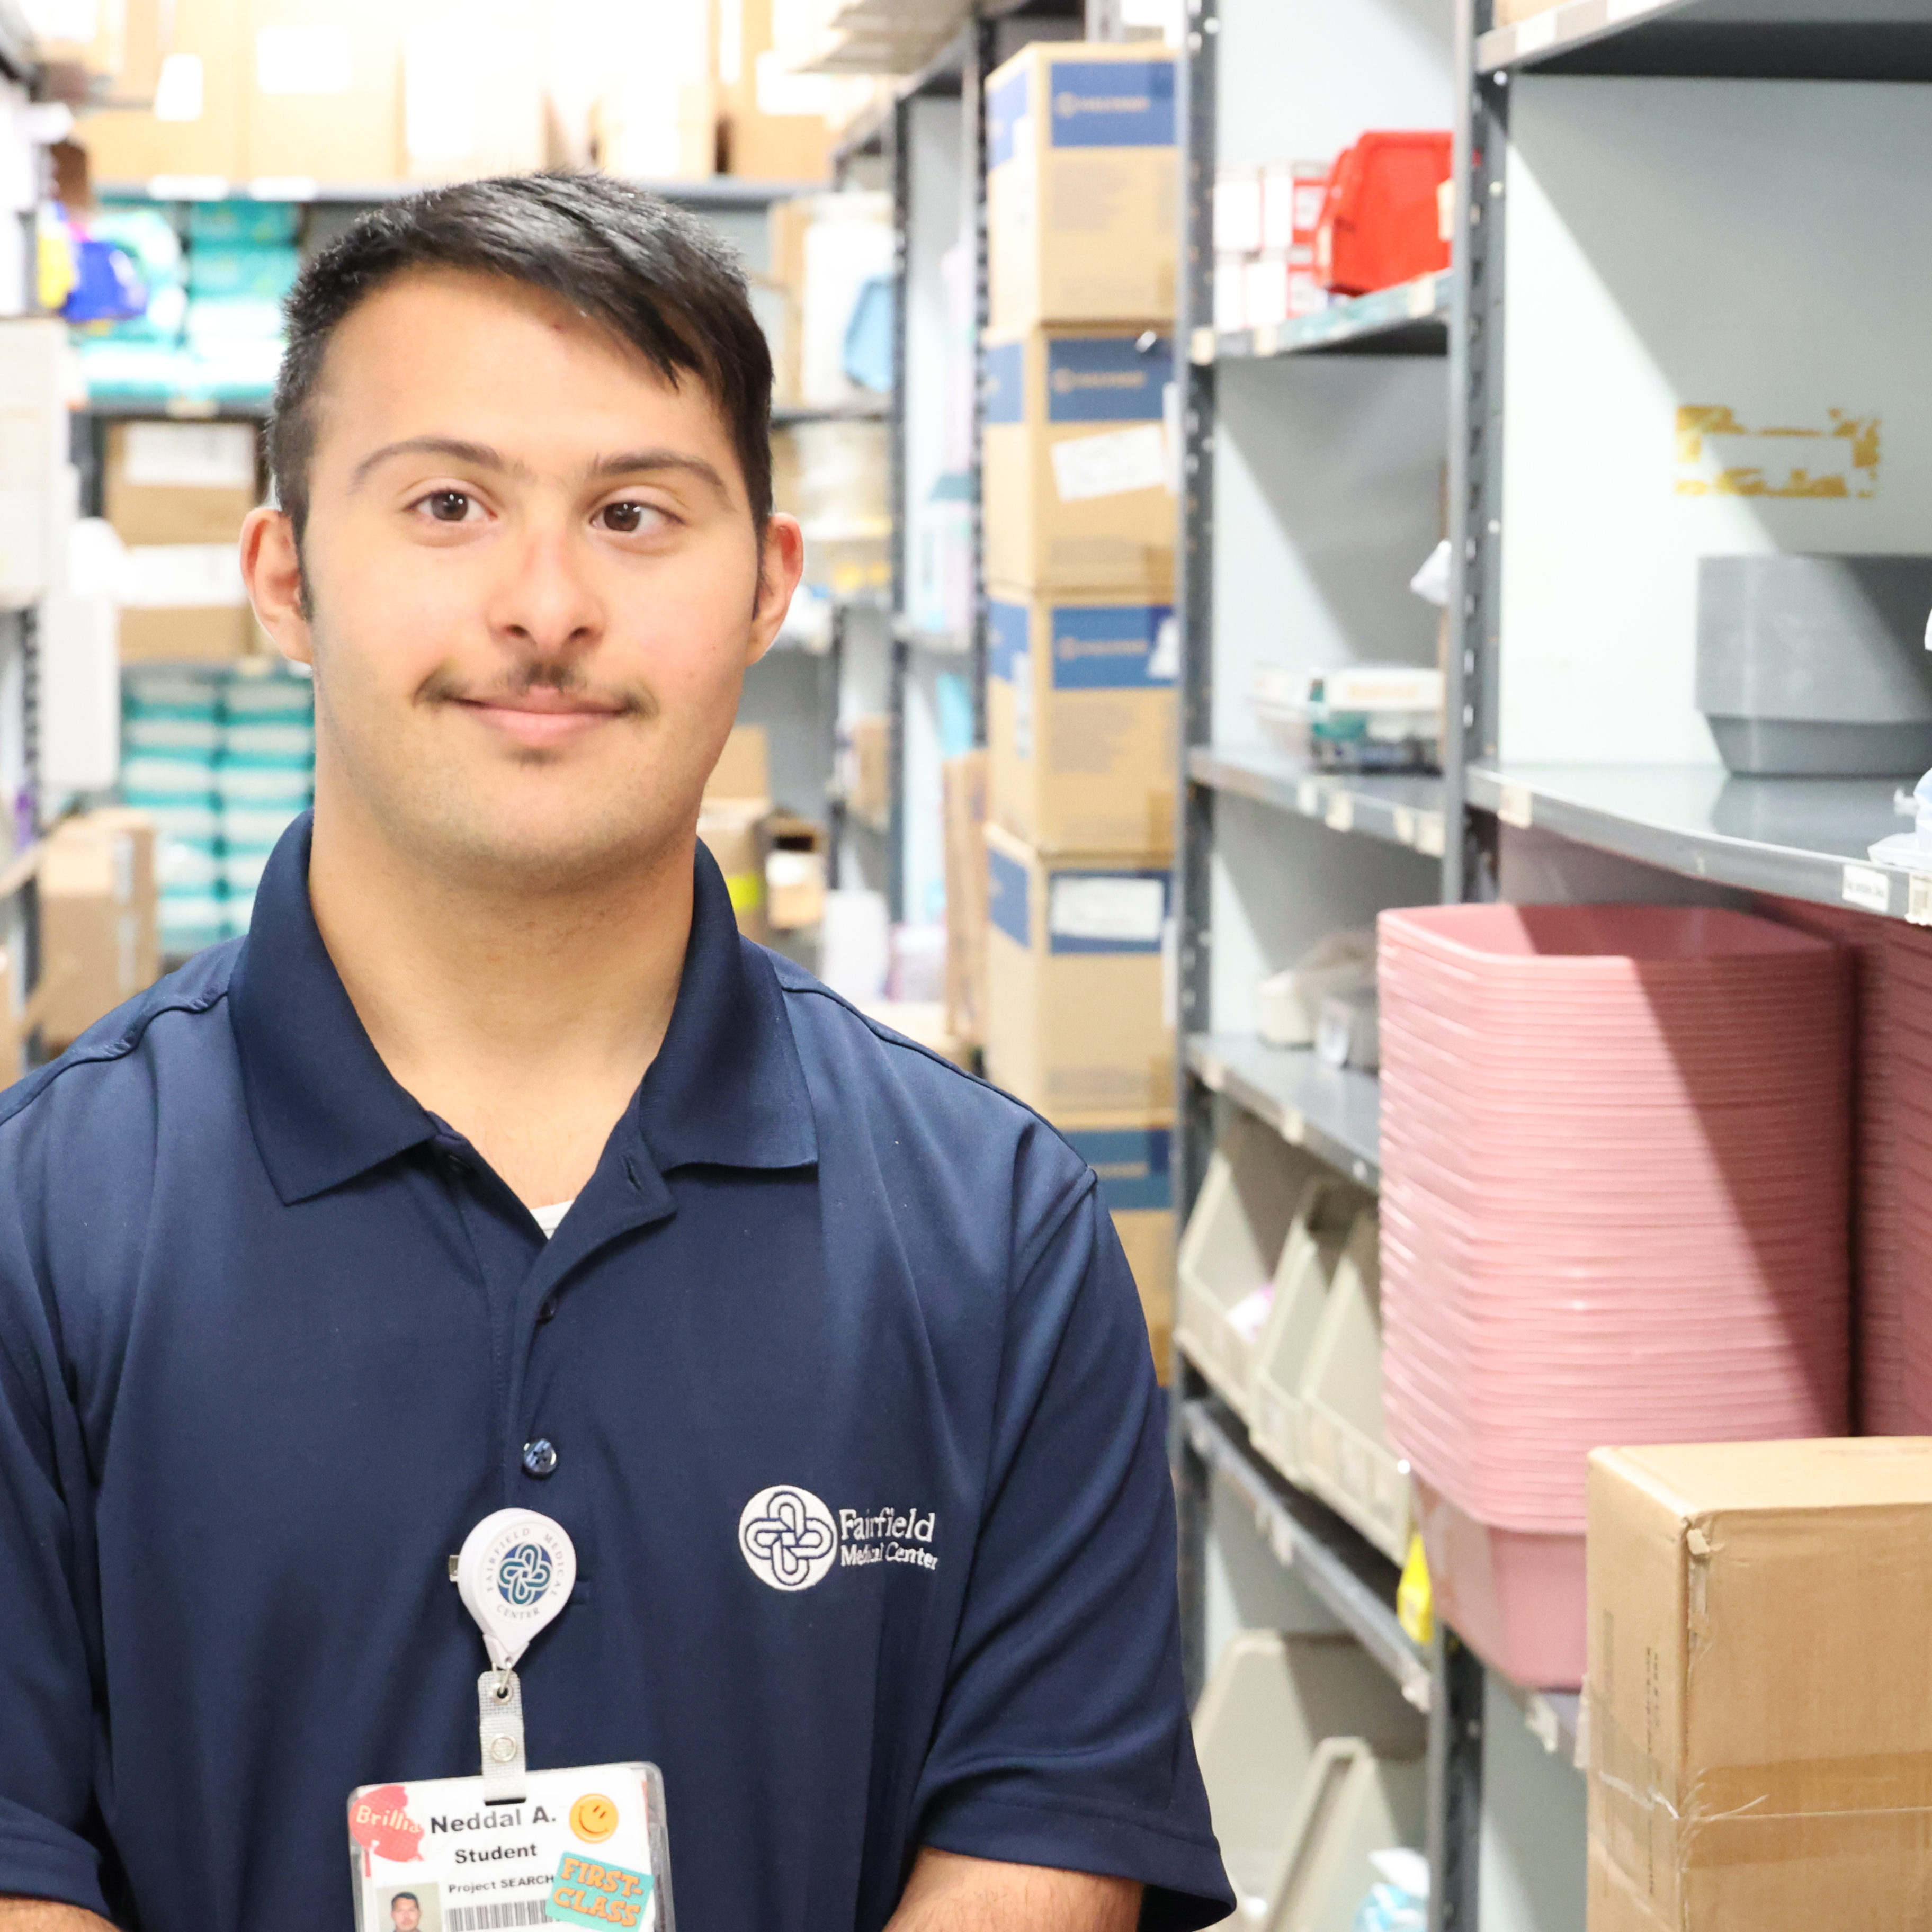 A Hispanic, male student wears a Fairfield Medical polo shirt in the aisle of a stockroom.